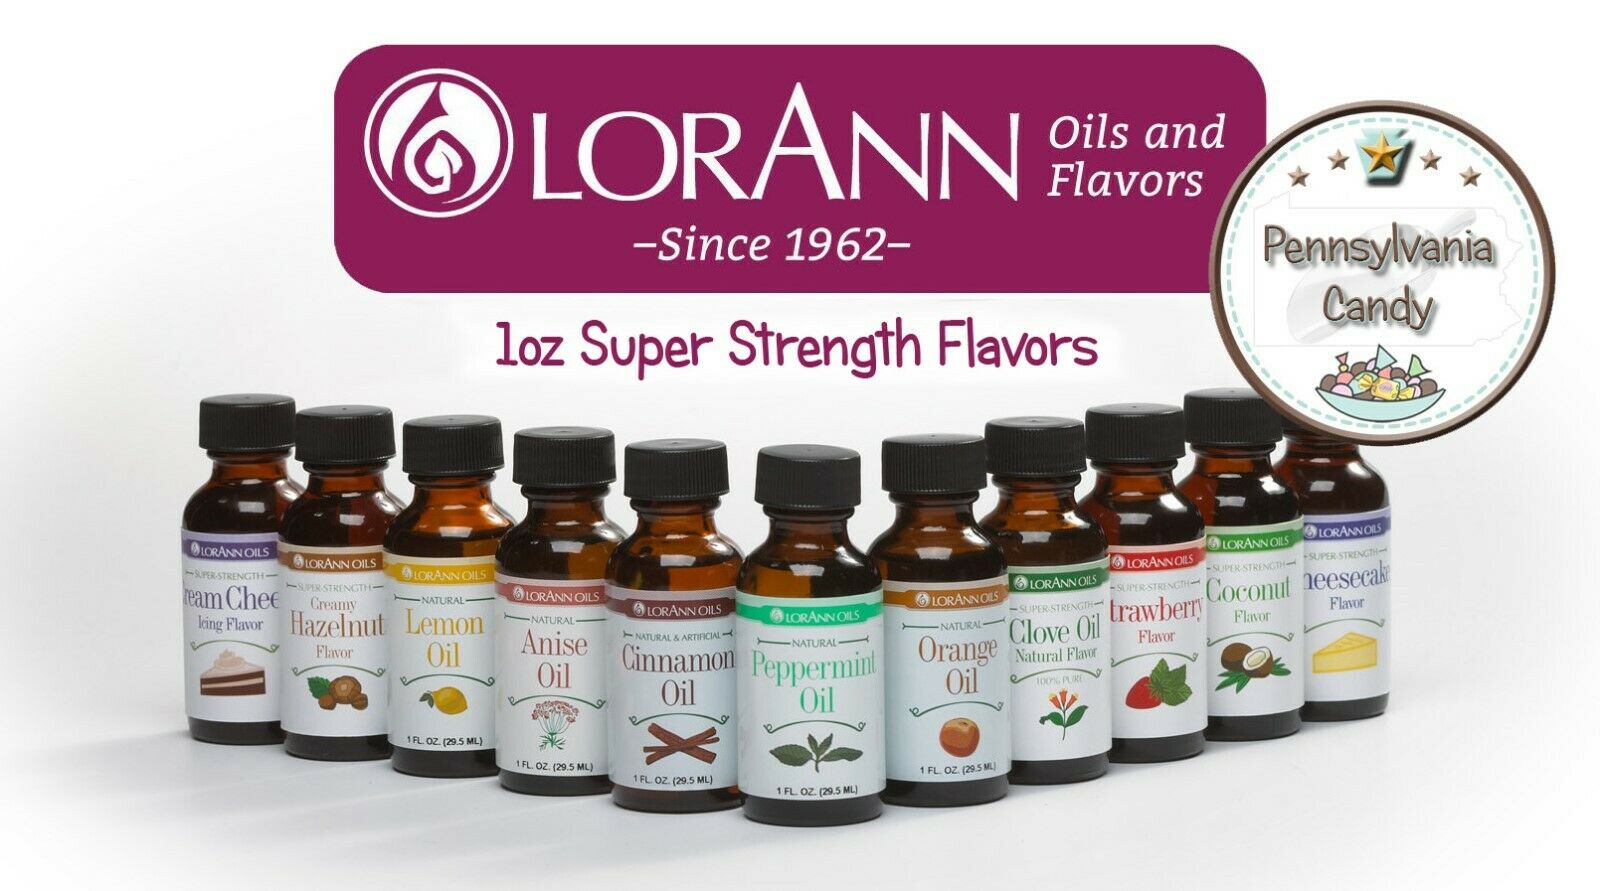 Lorann 1 Oz Super Strength Flavoring Hard Candy Flavor Flavors Oils Extracts